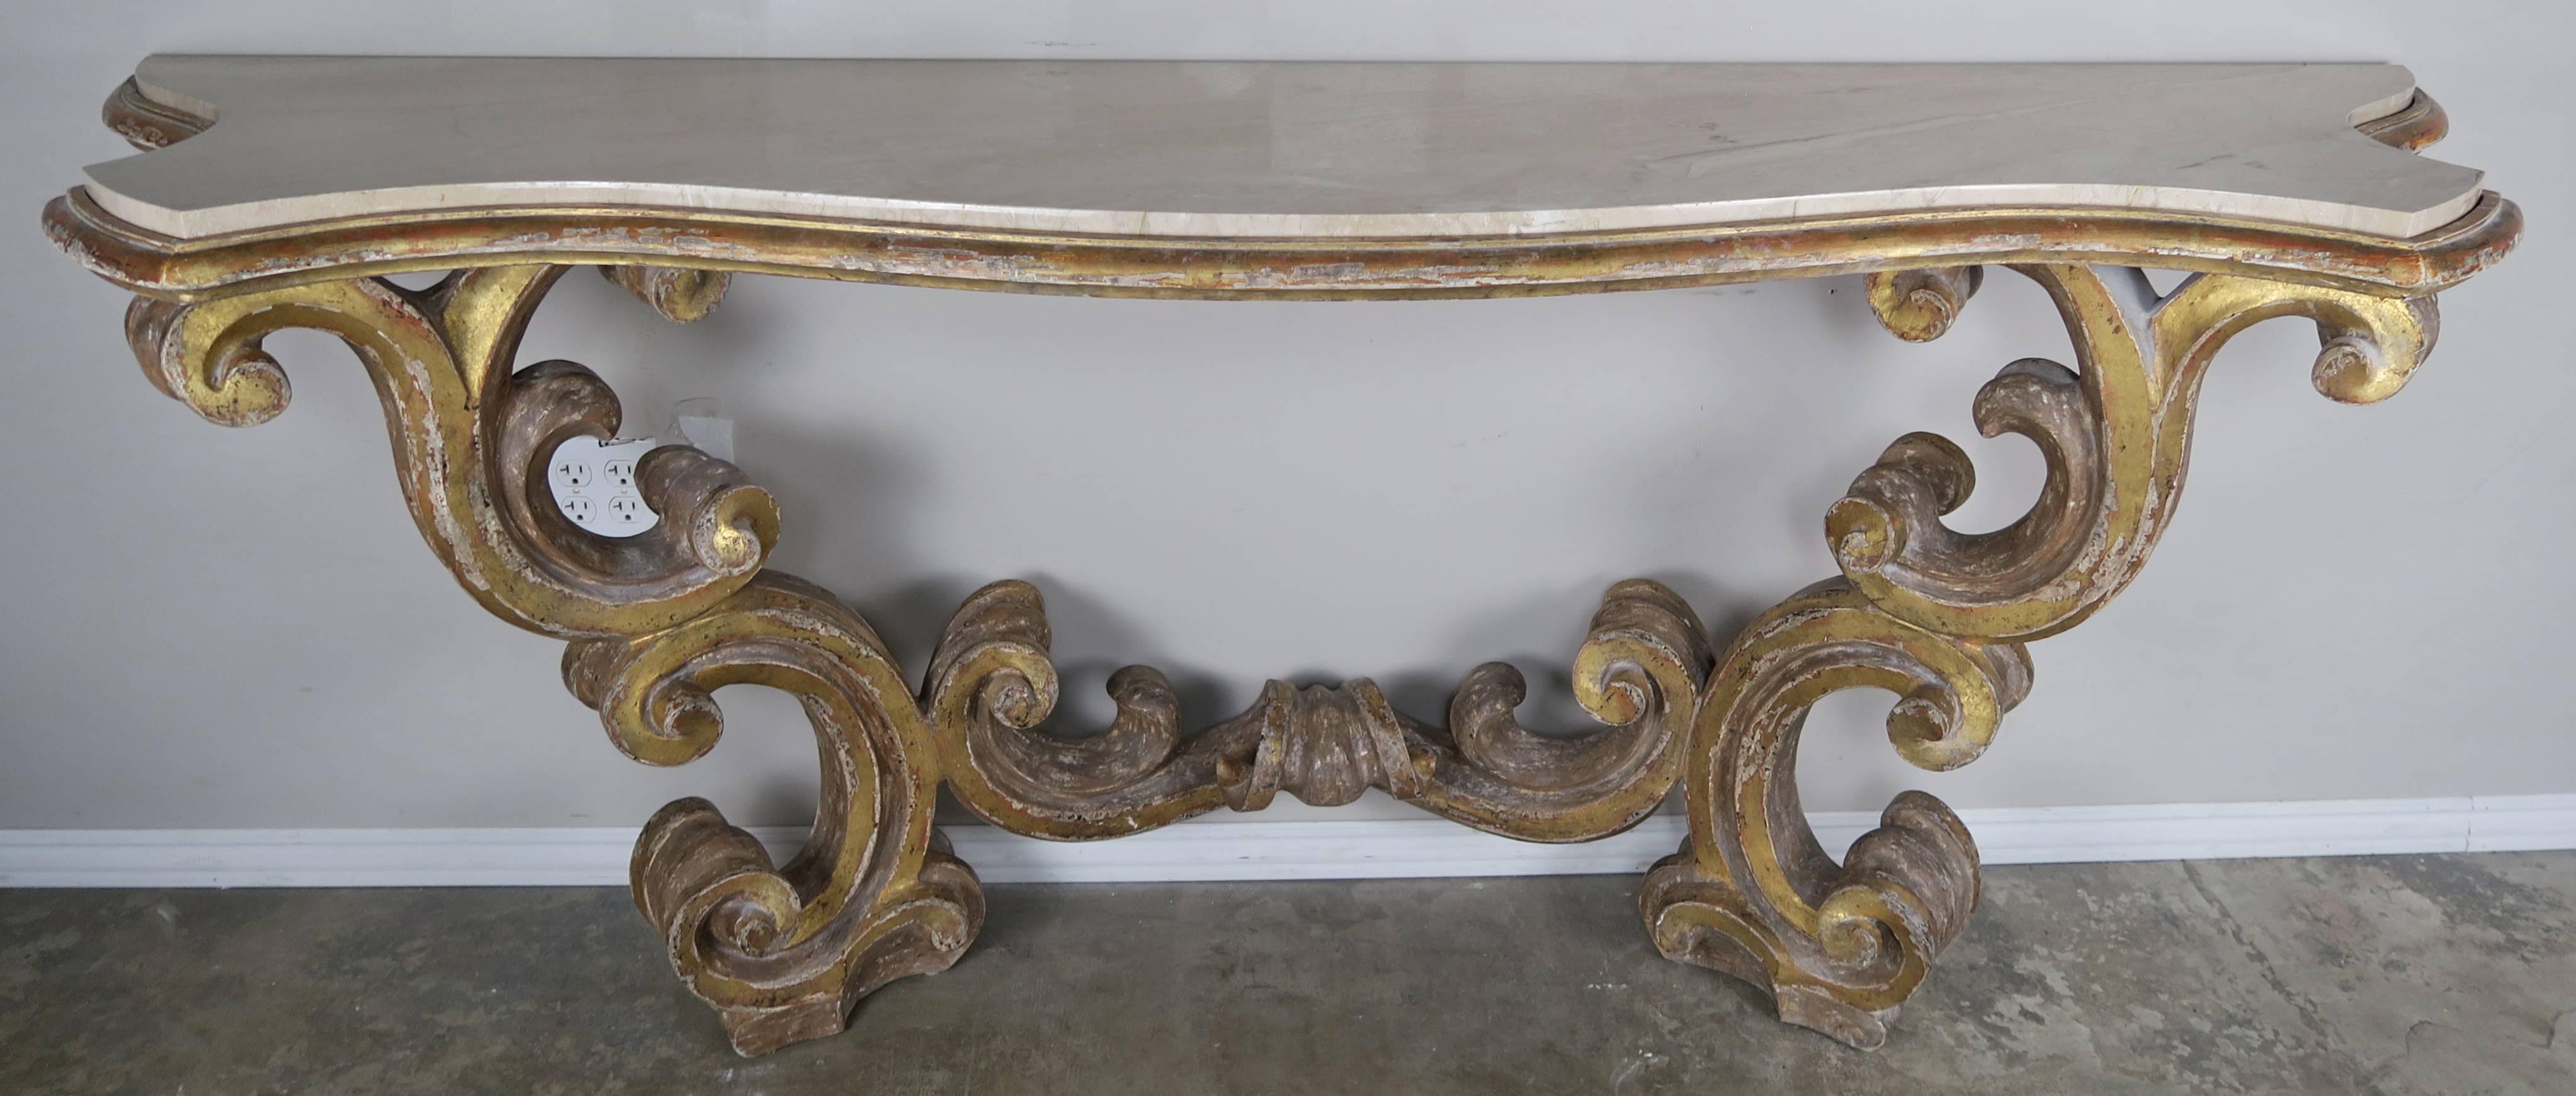 Italian scrolled giltwood carved console with an inset cream colored marble top. The table stands on two beautifully scroll shaped legs connected by a center stretcher.
 